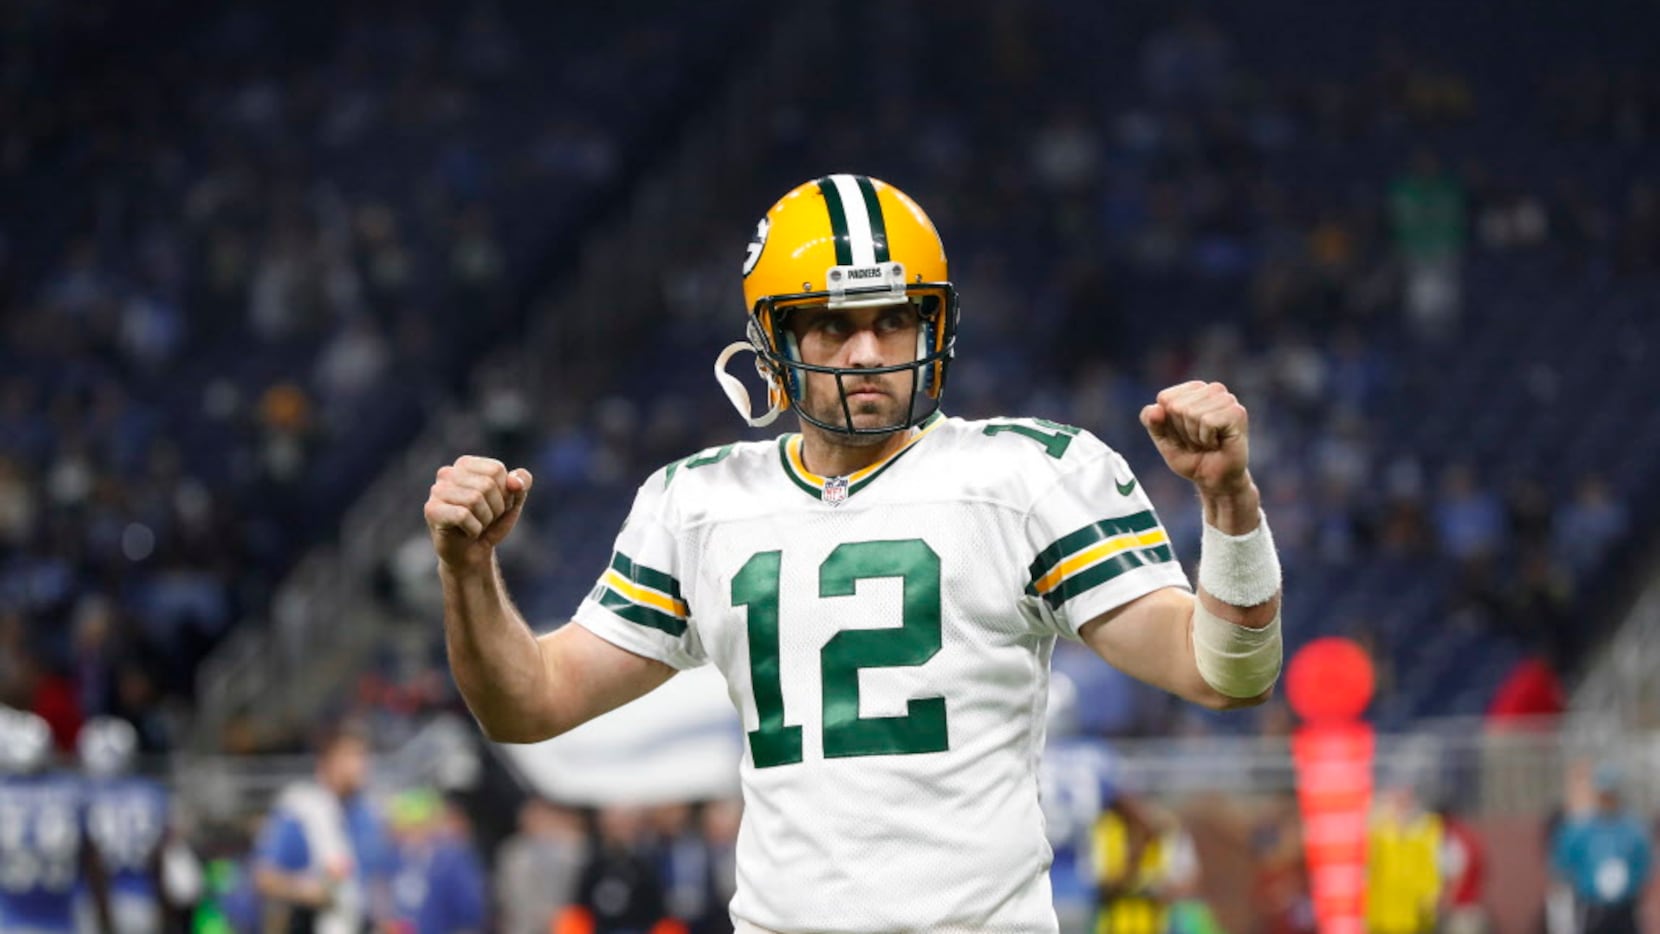 Aaron Rodgers is on a Tom Brady-like roll, but can he play even